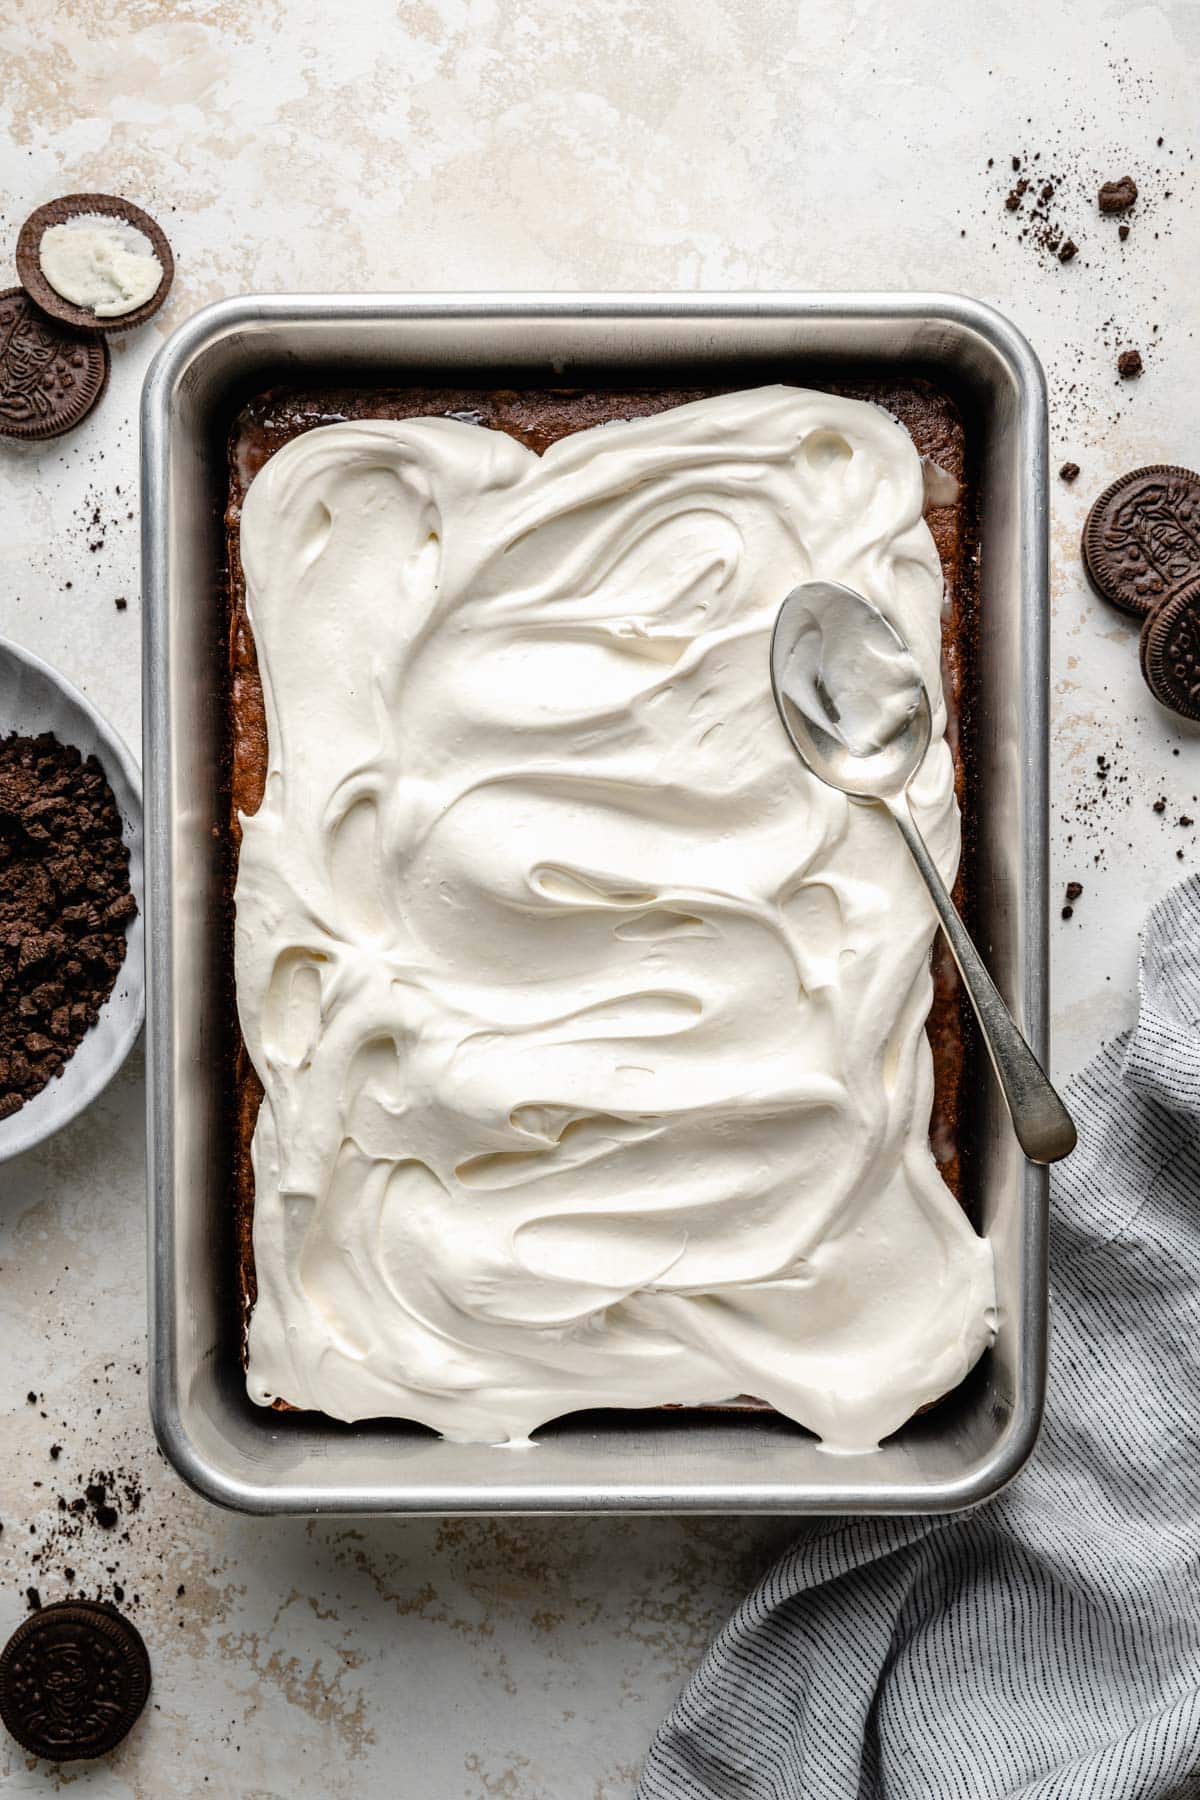 Spreading Cool Whip over a chocolate cake.